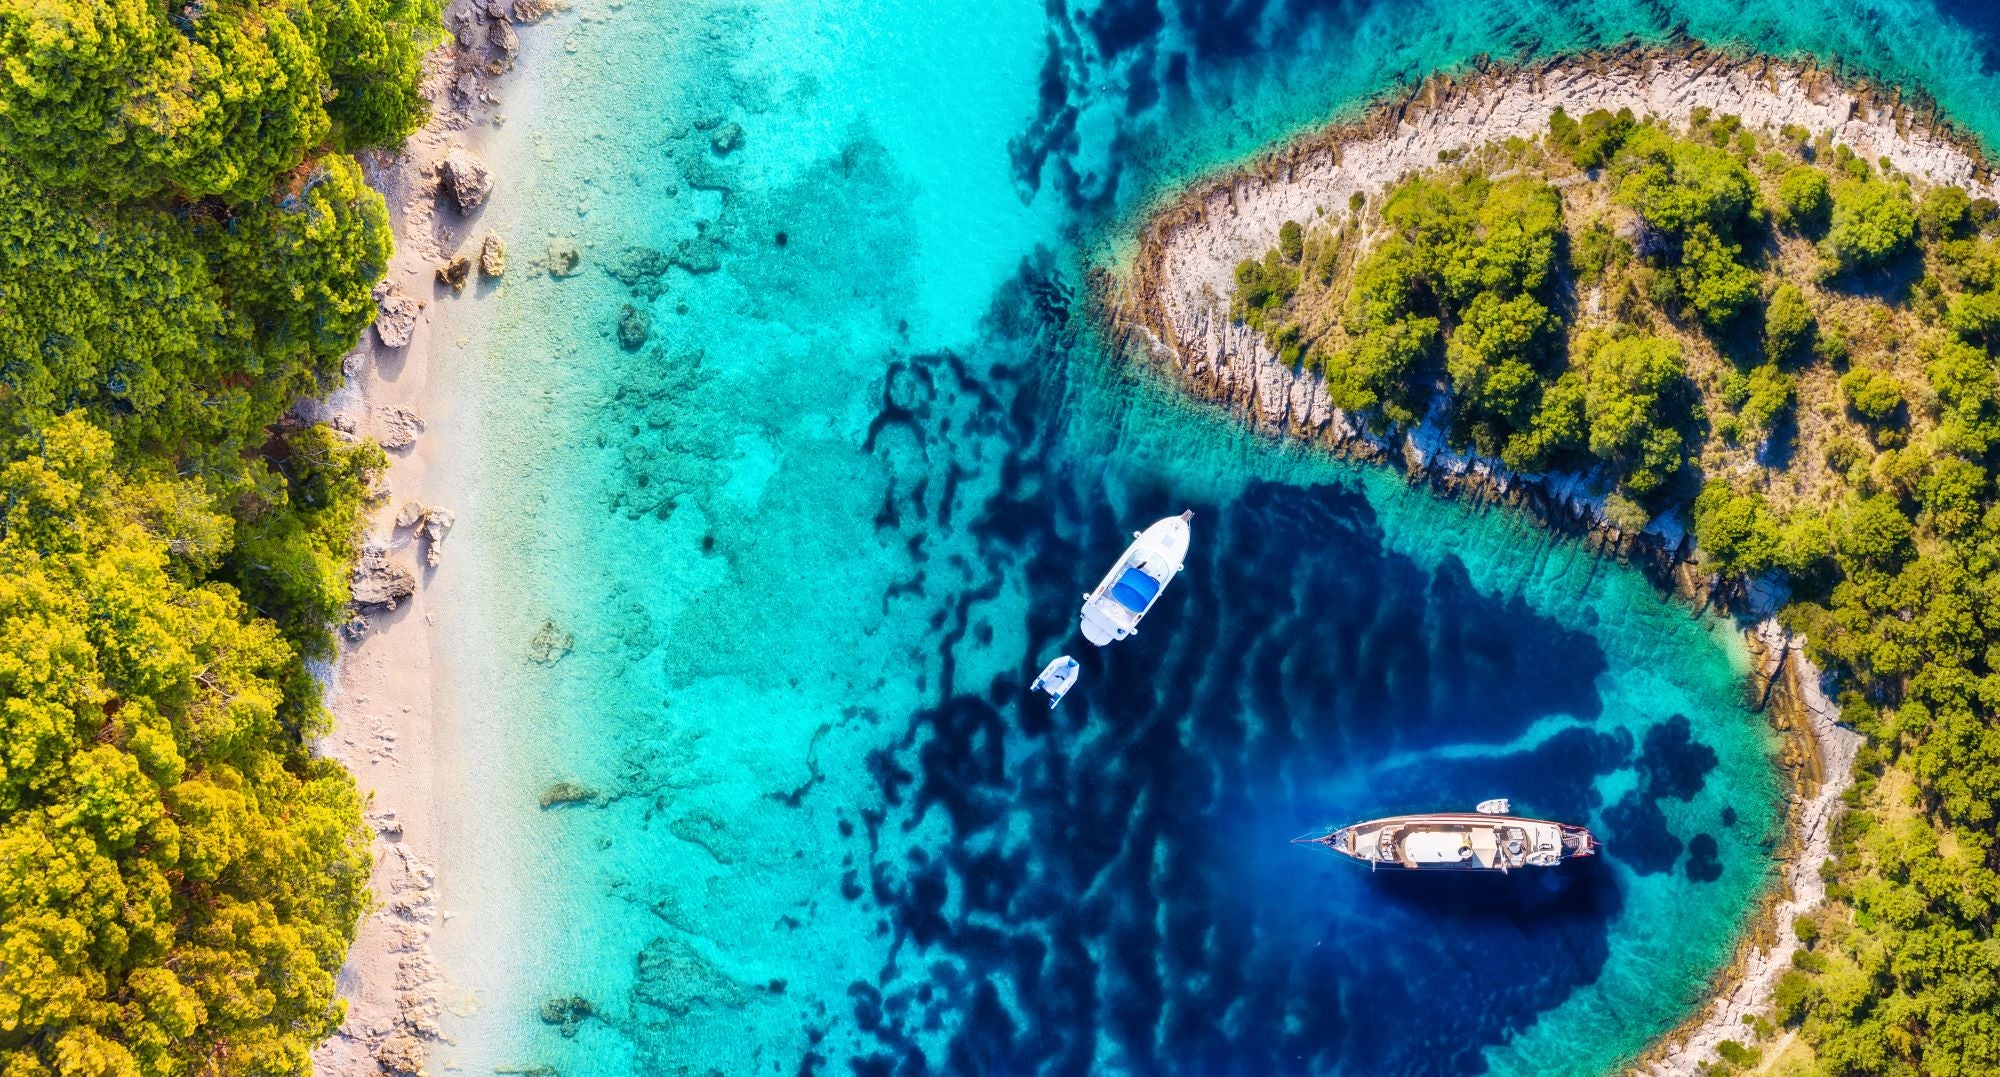 Birds eye view of blue Sea in Croatia with two boats